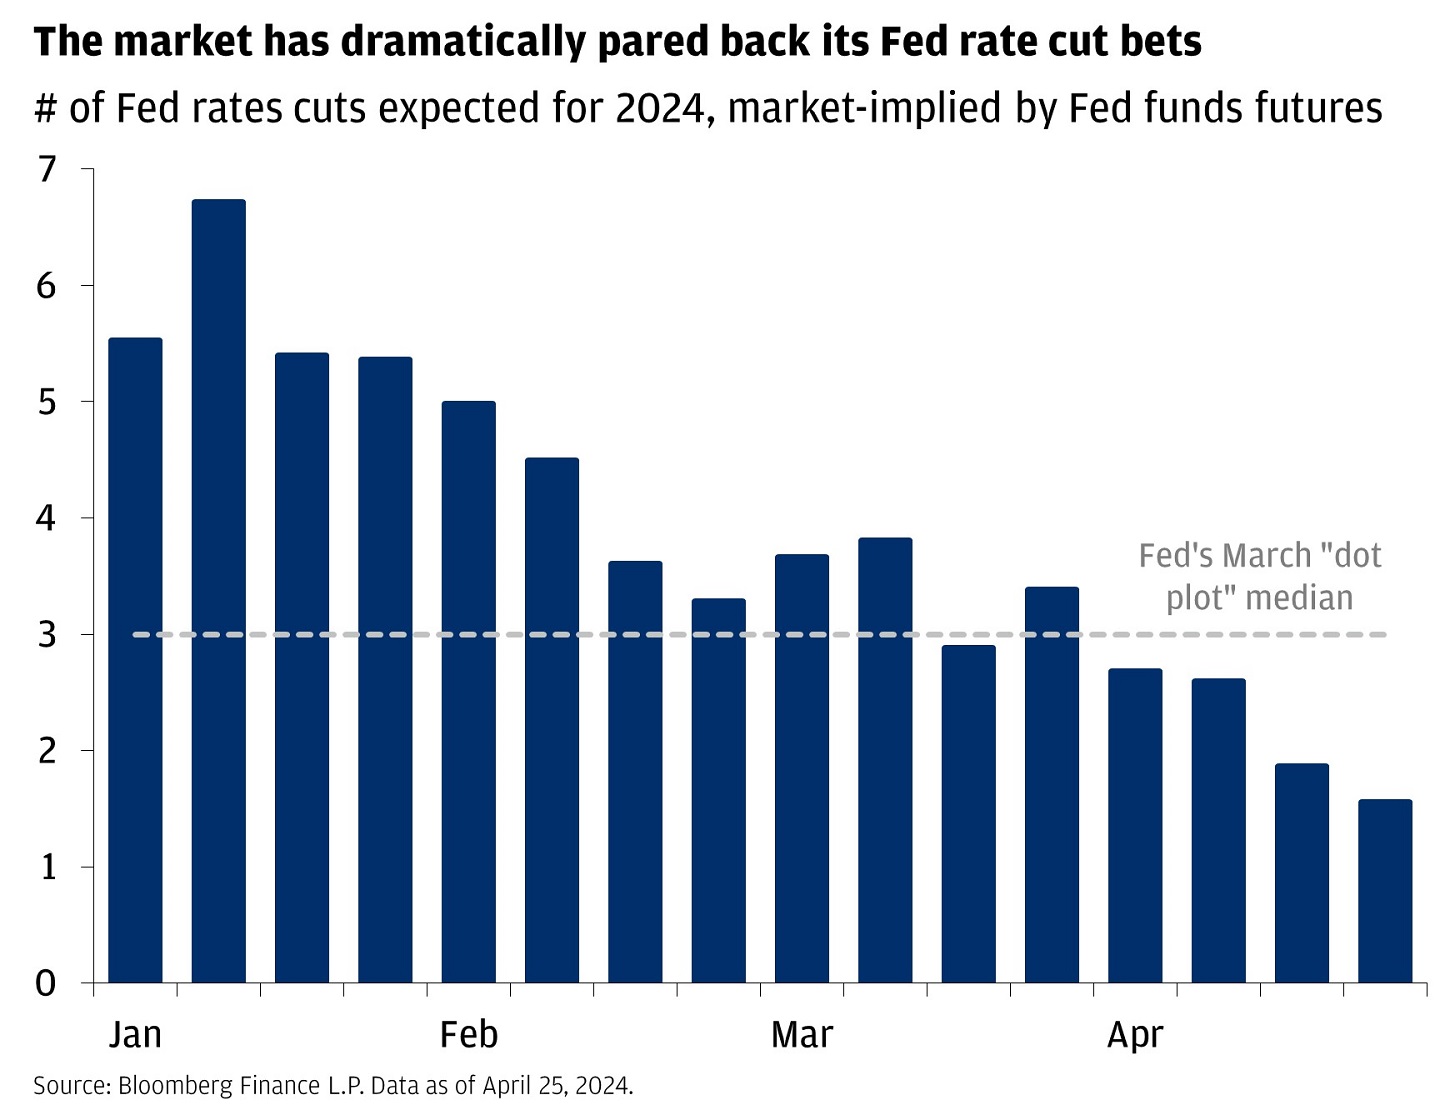 Bar chart showing market expectations for Fed rate cuts in 2024.